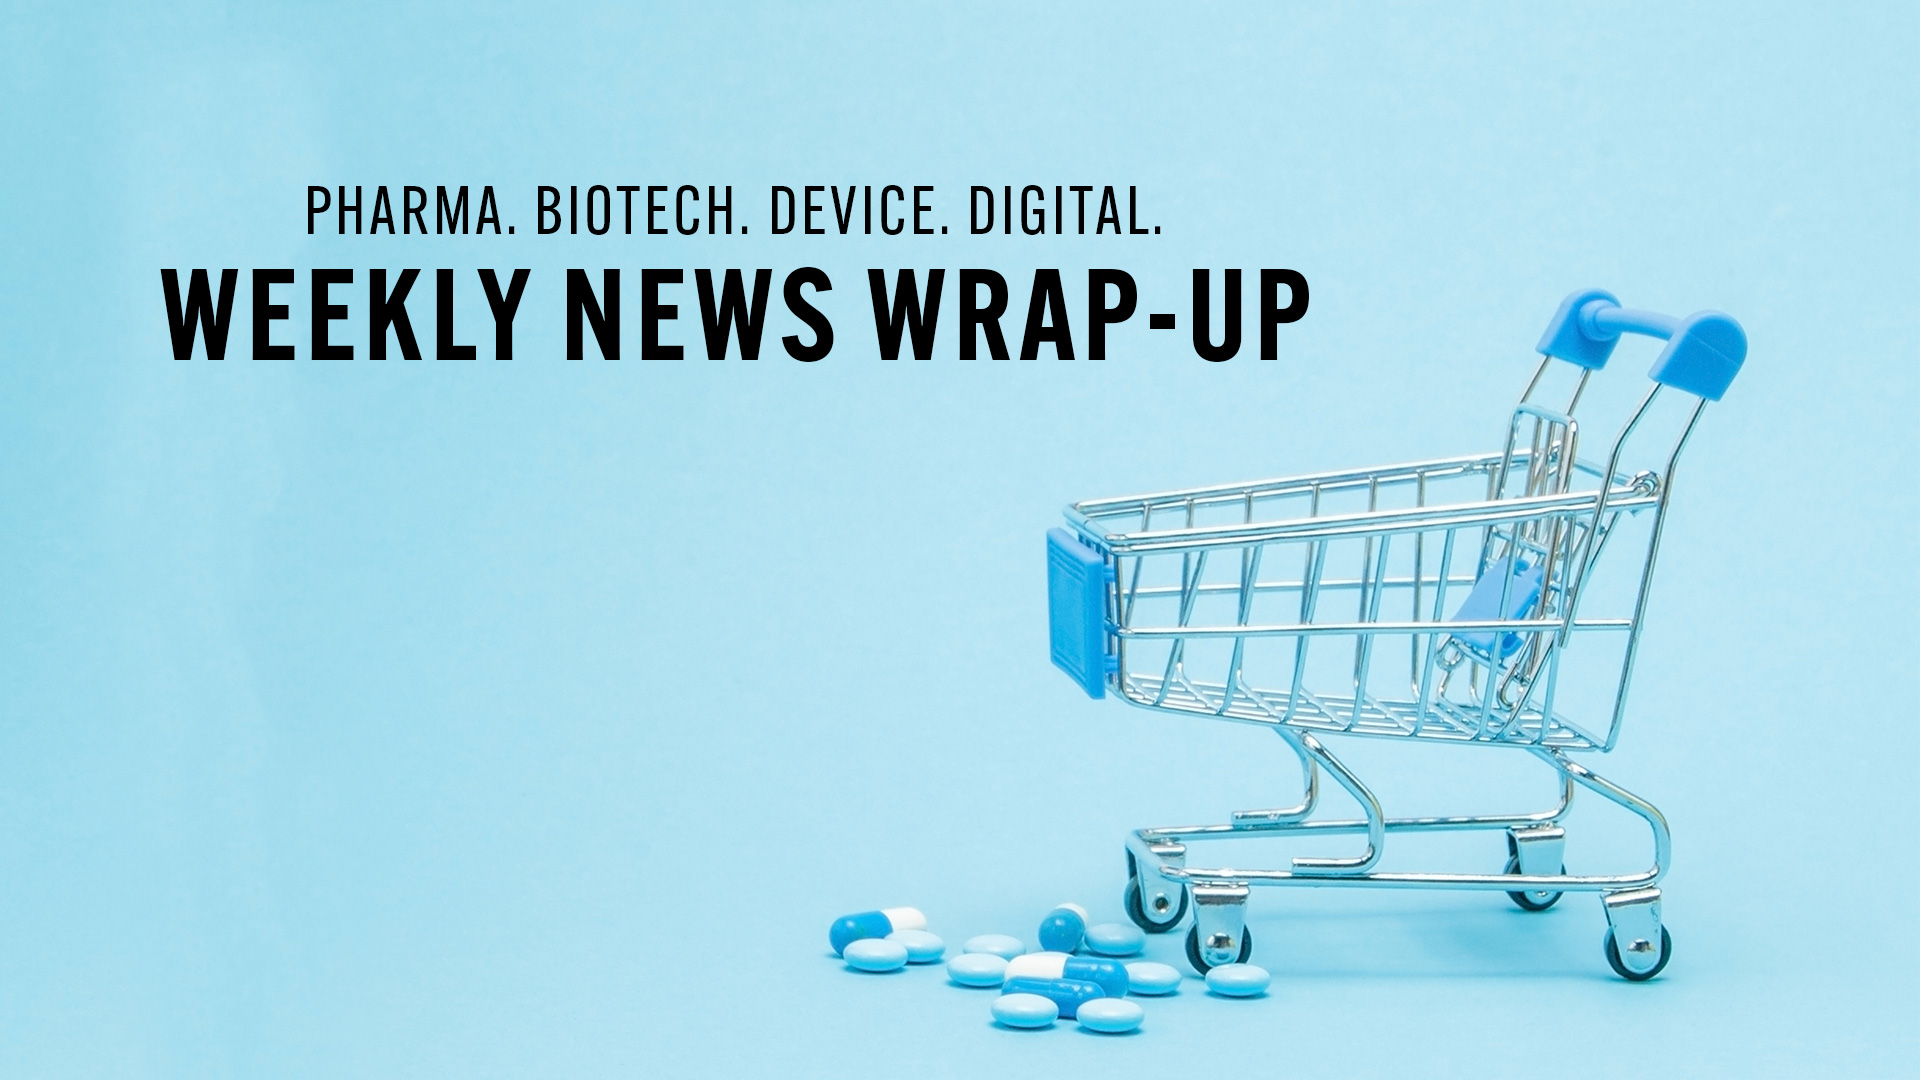 Healthcare Industry News Weekly Wrap-Up: March 3, 2023